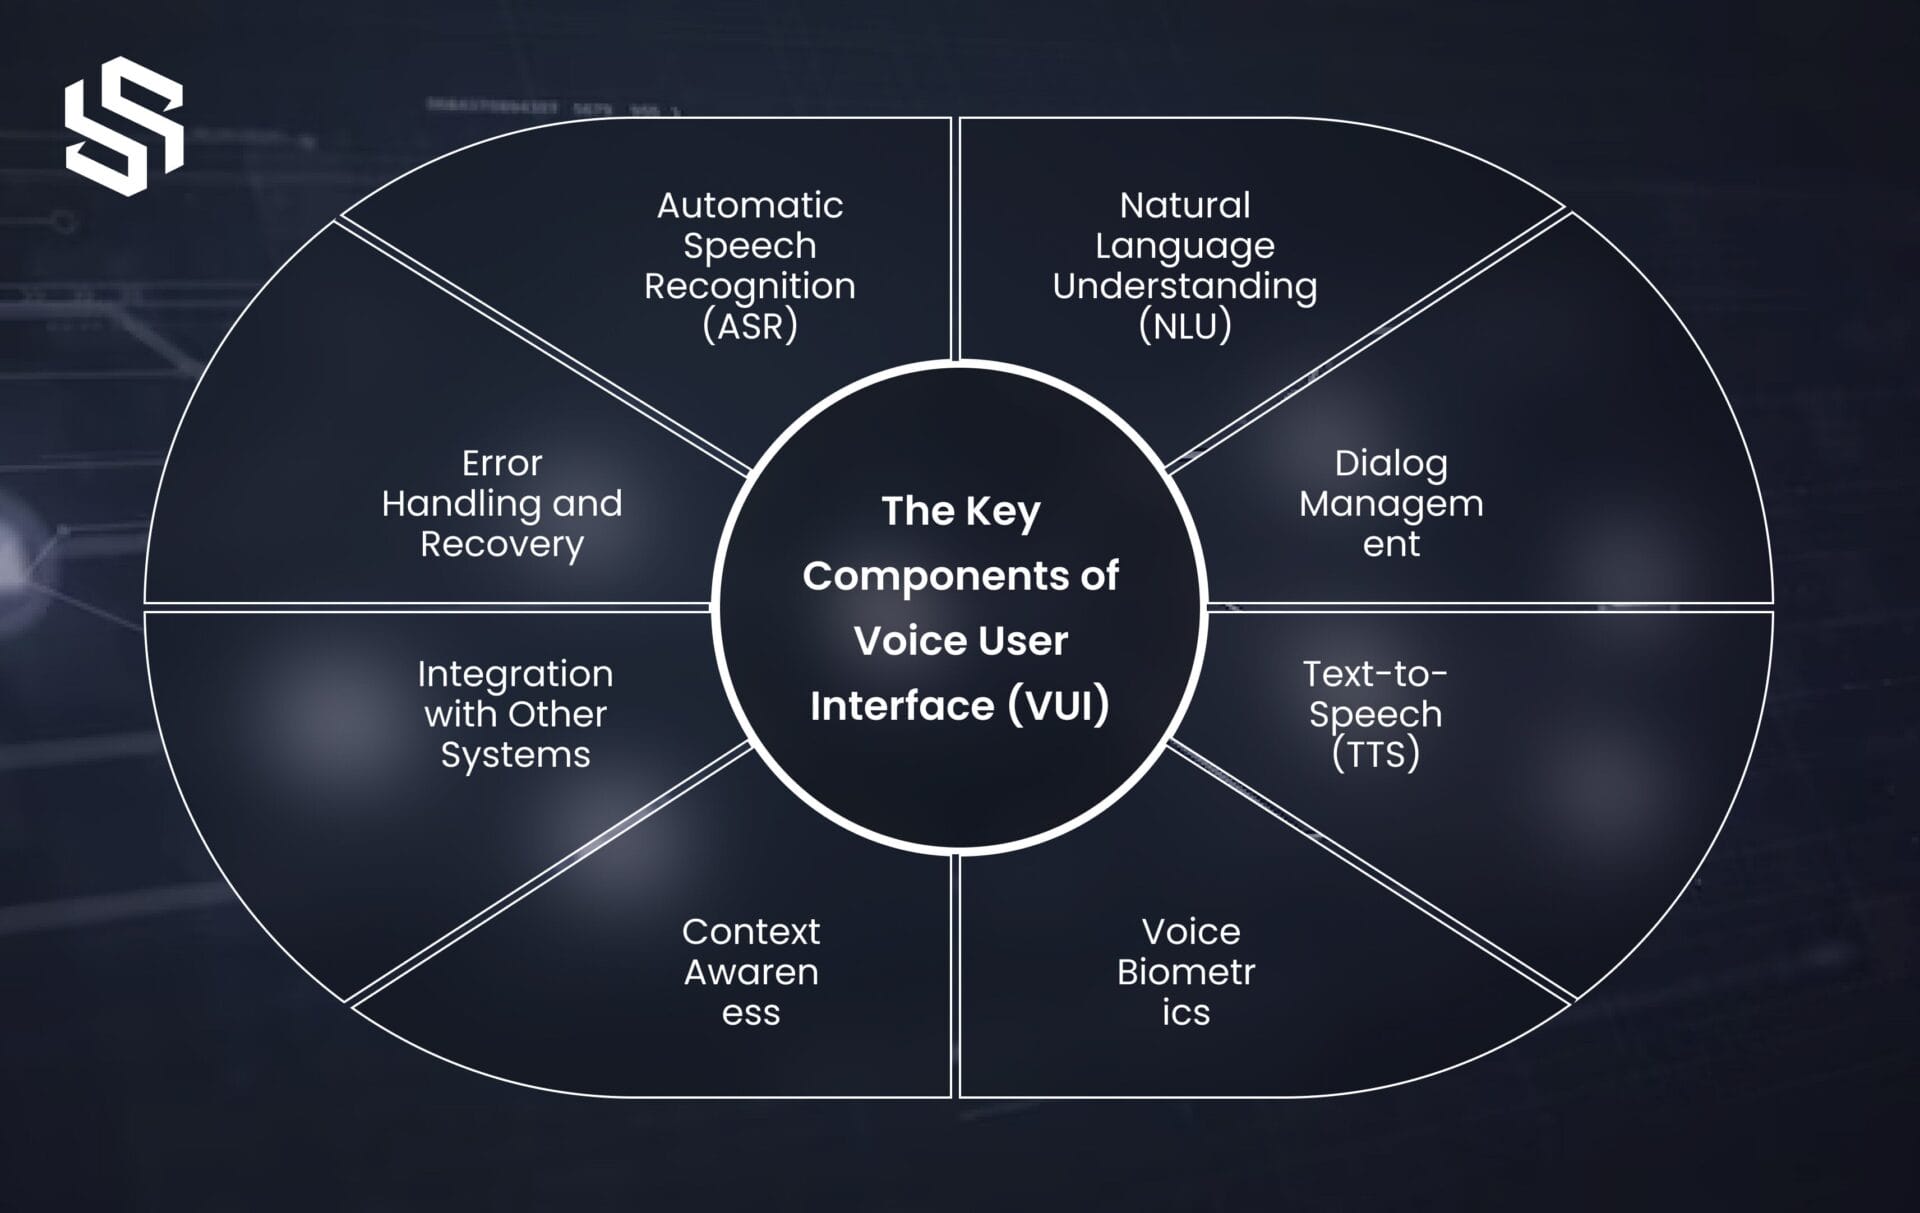 The Key Components of Voice User Interface (VUI)